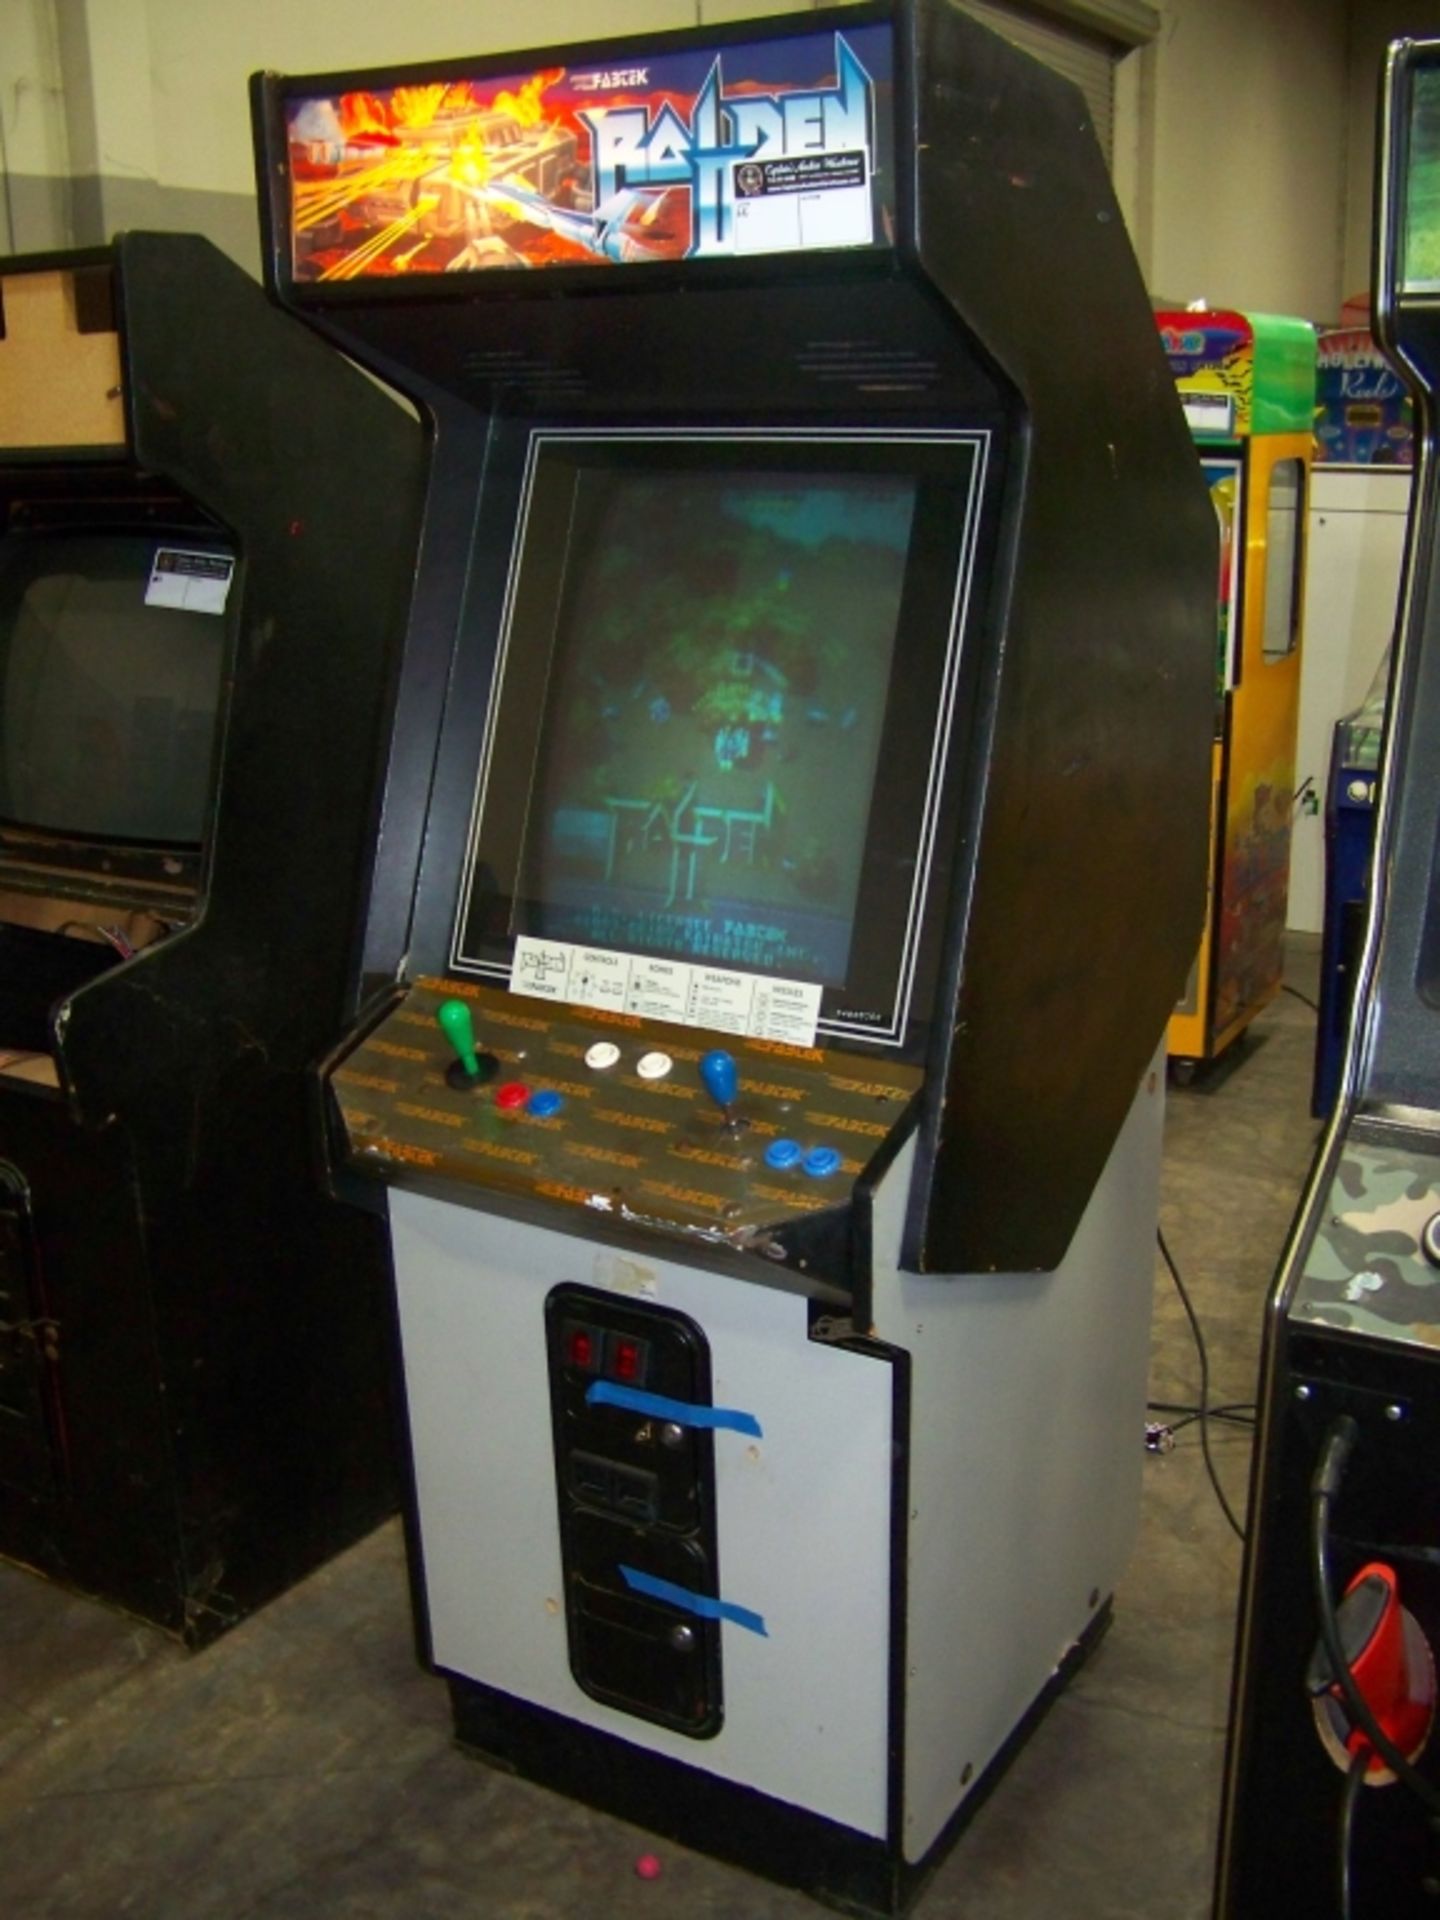 RAIDEN II VERTICAL SHOOTER UPRIGHT ARCADE GAME - Image 2 of 2